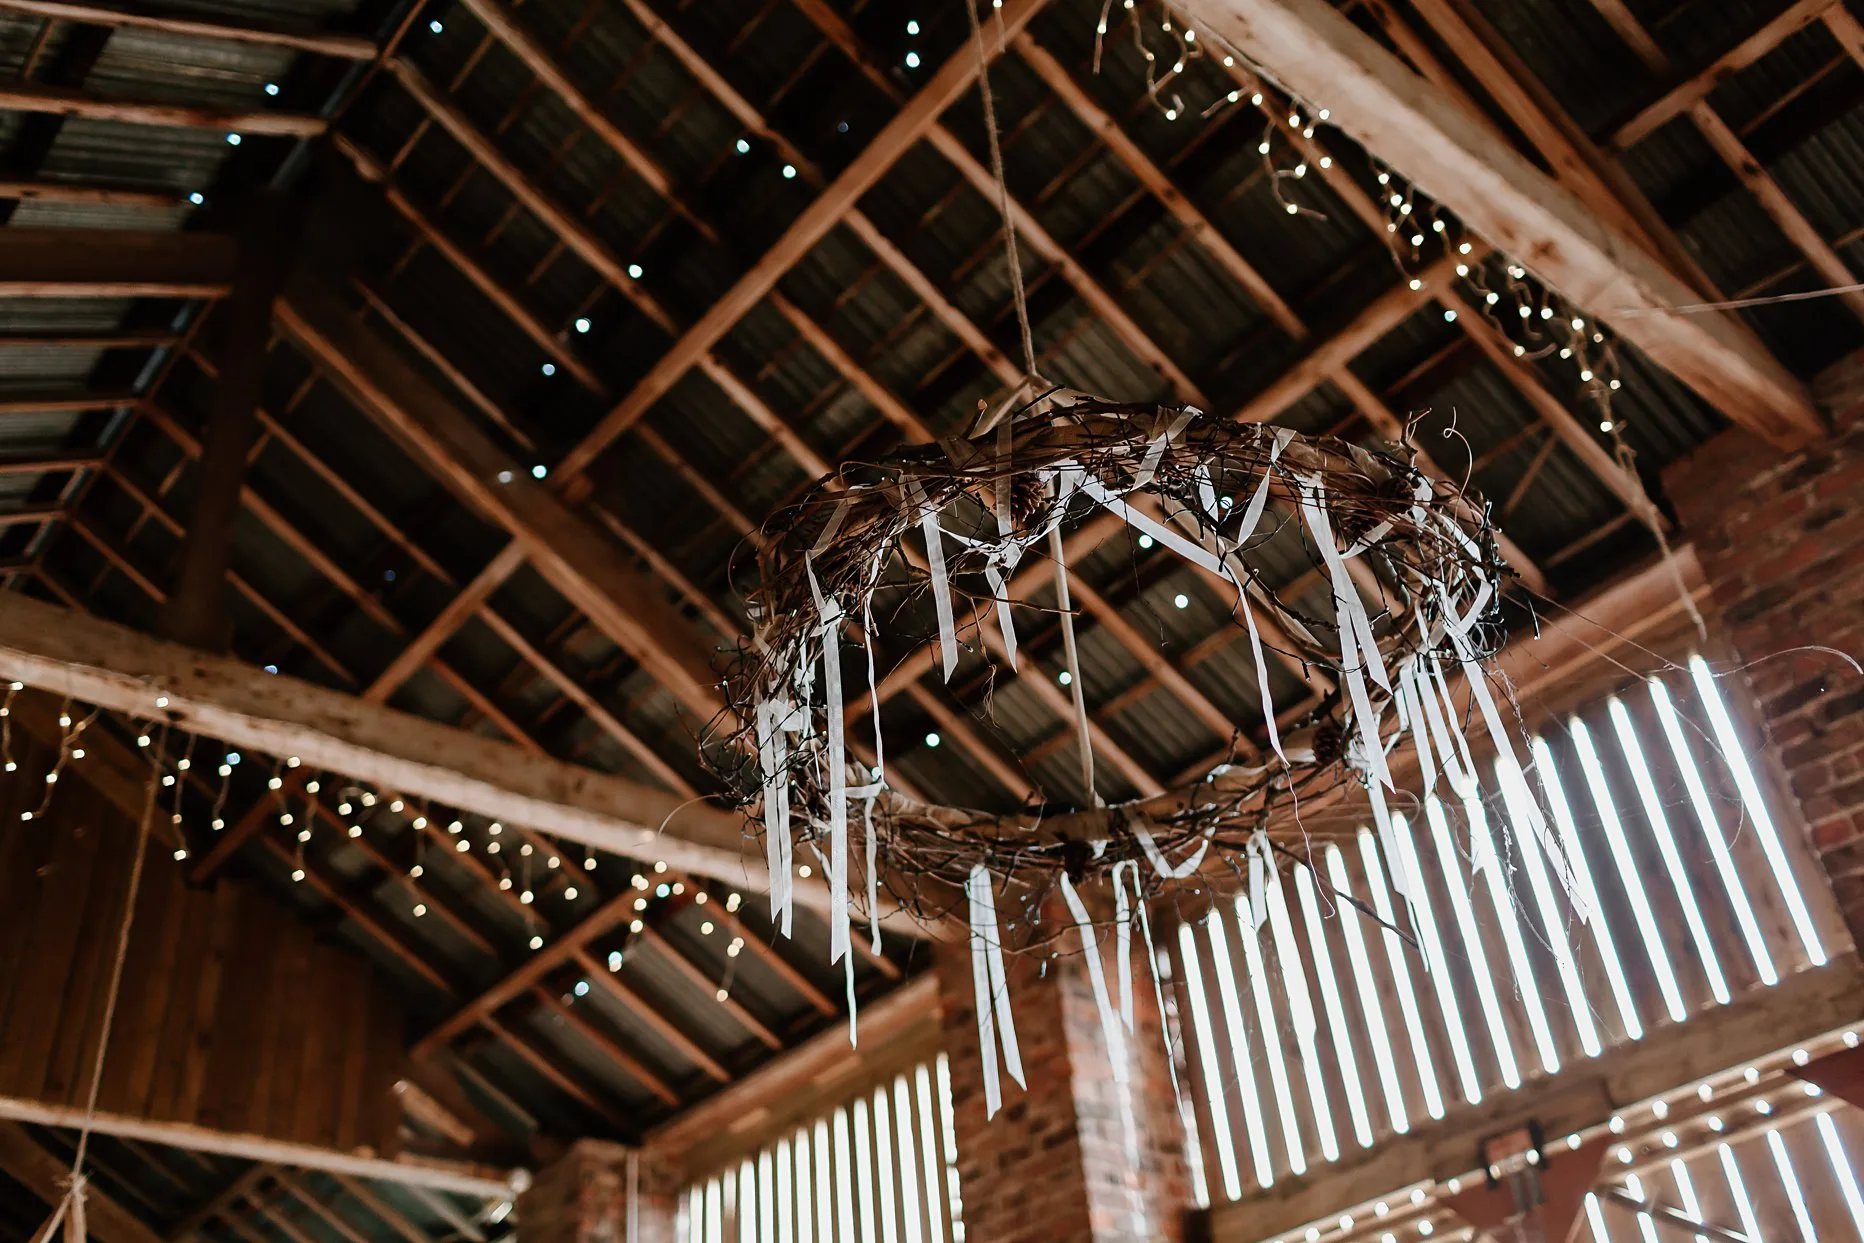 A wicker hoop hung from the wooden beams inside a wedding barn at Camp Katur.